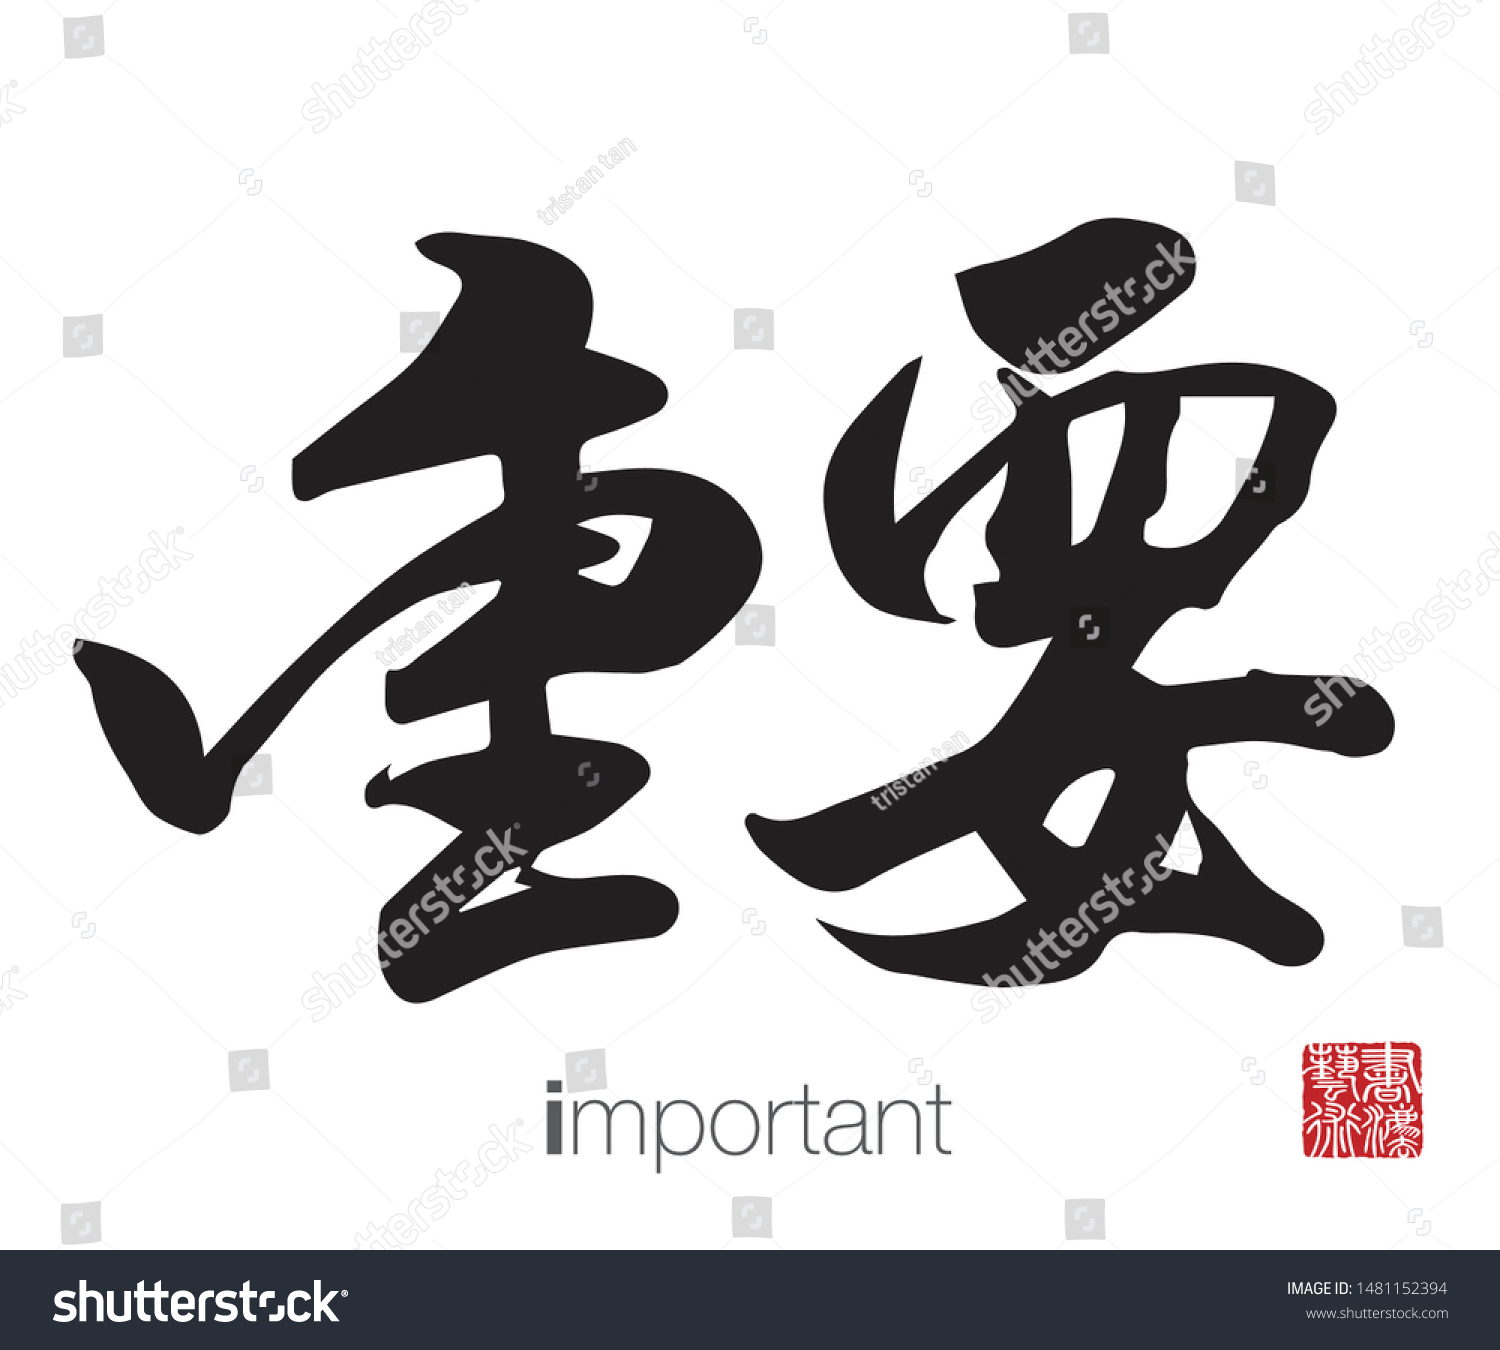 why is chinese calligraphy important